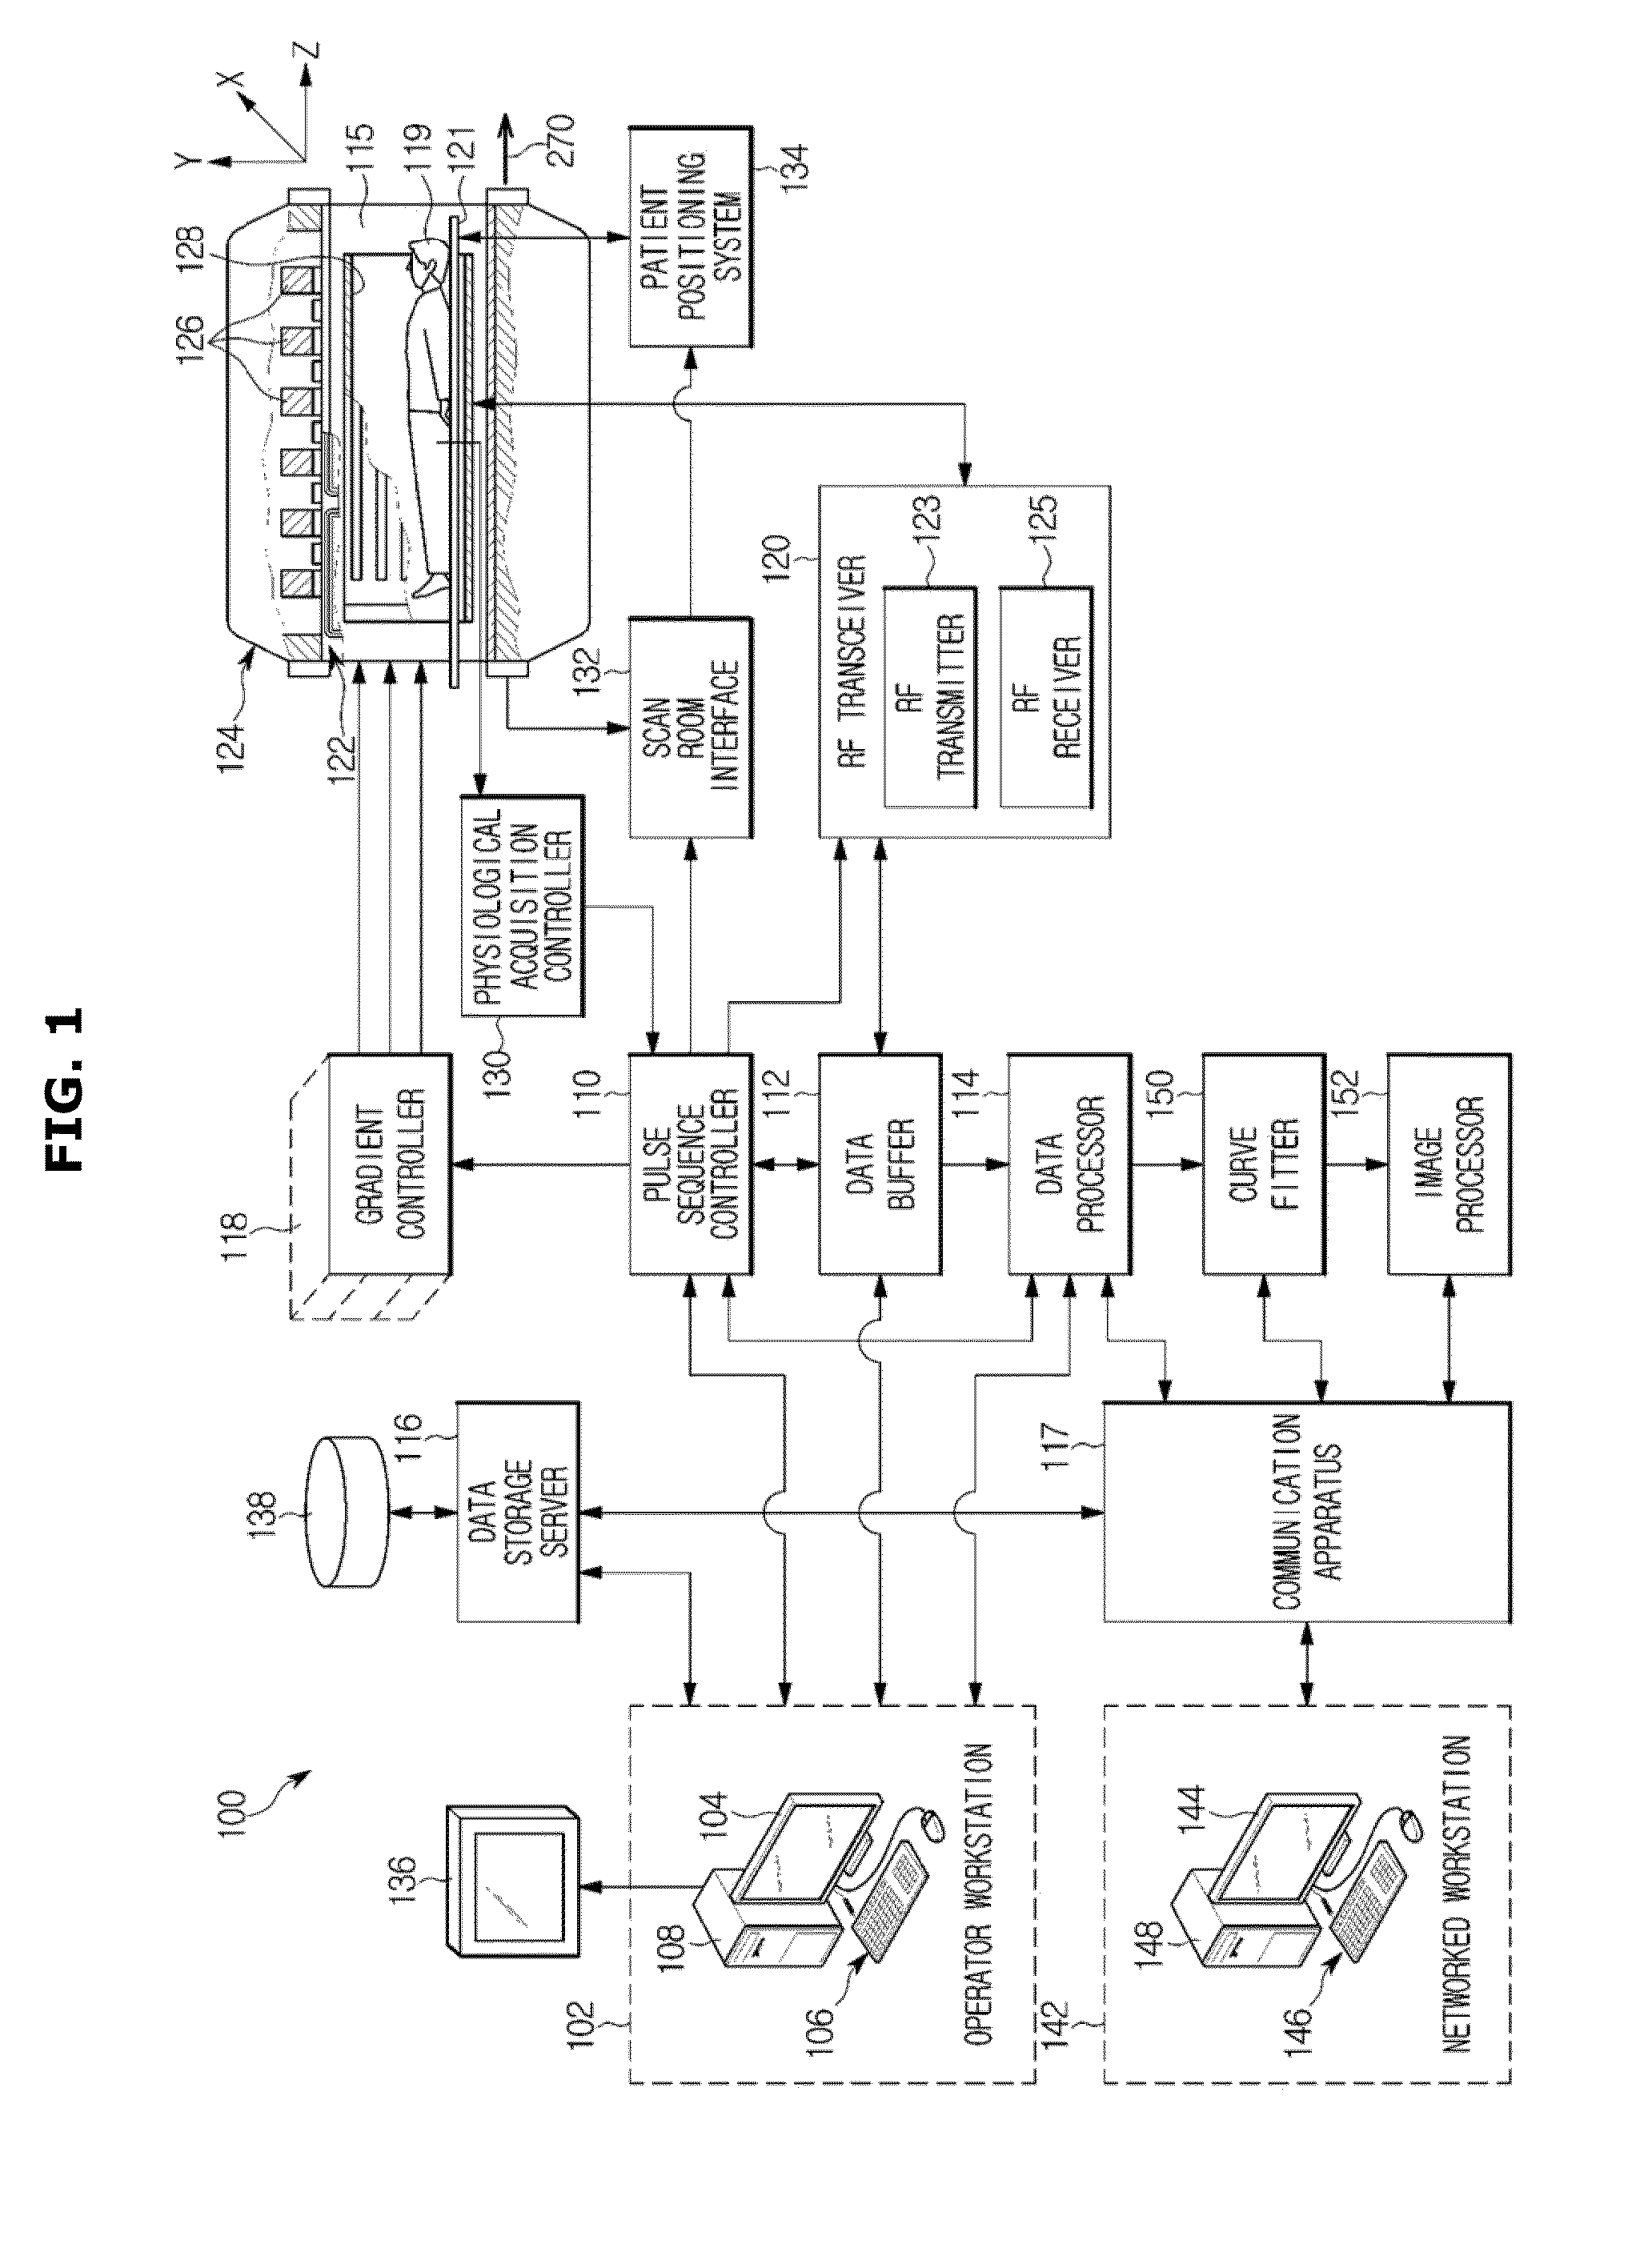 Method and apparatus for multi-slice imaging of t2-relaxation time